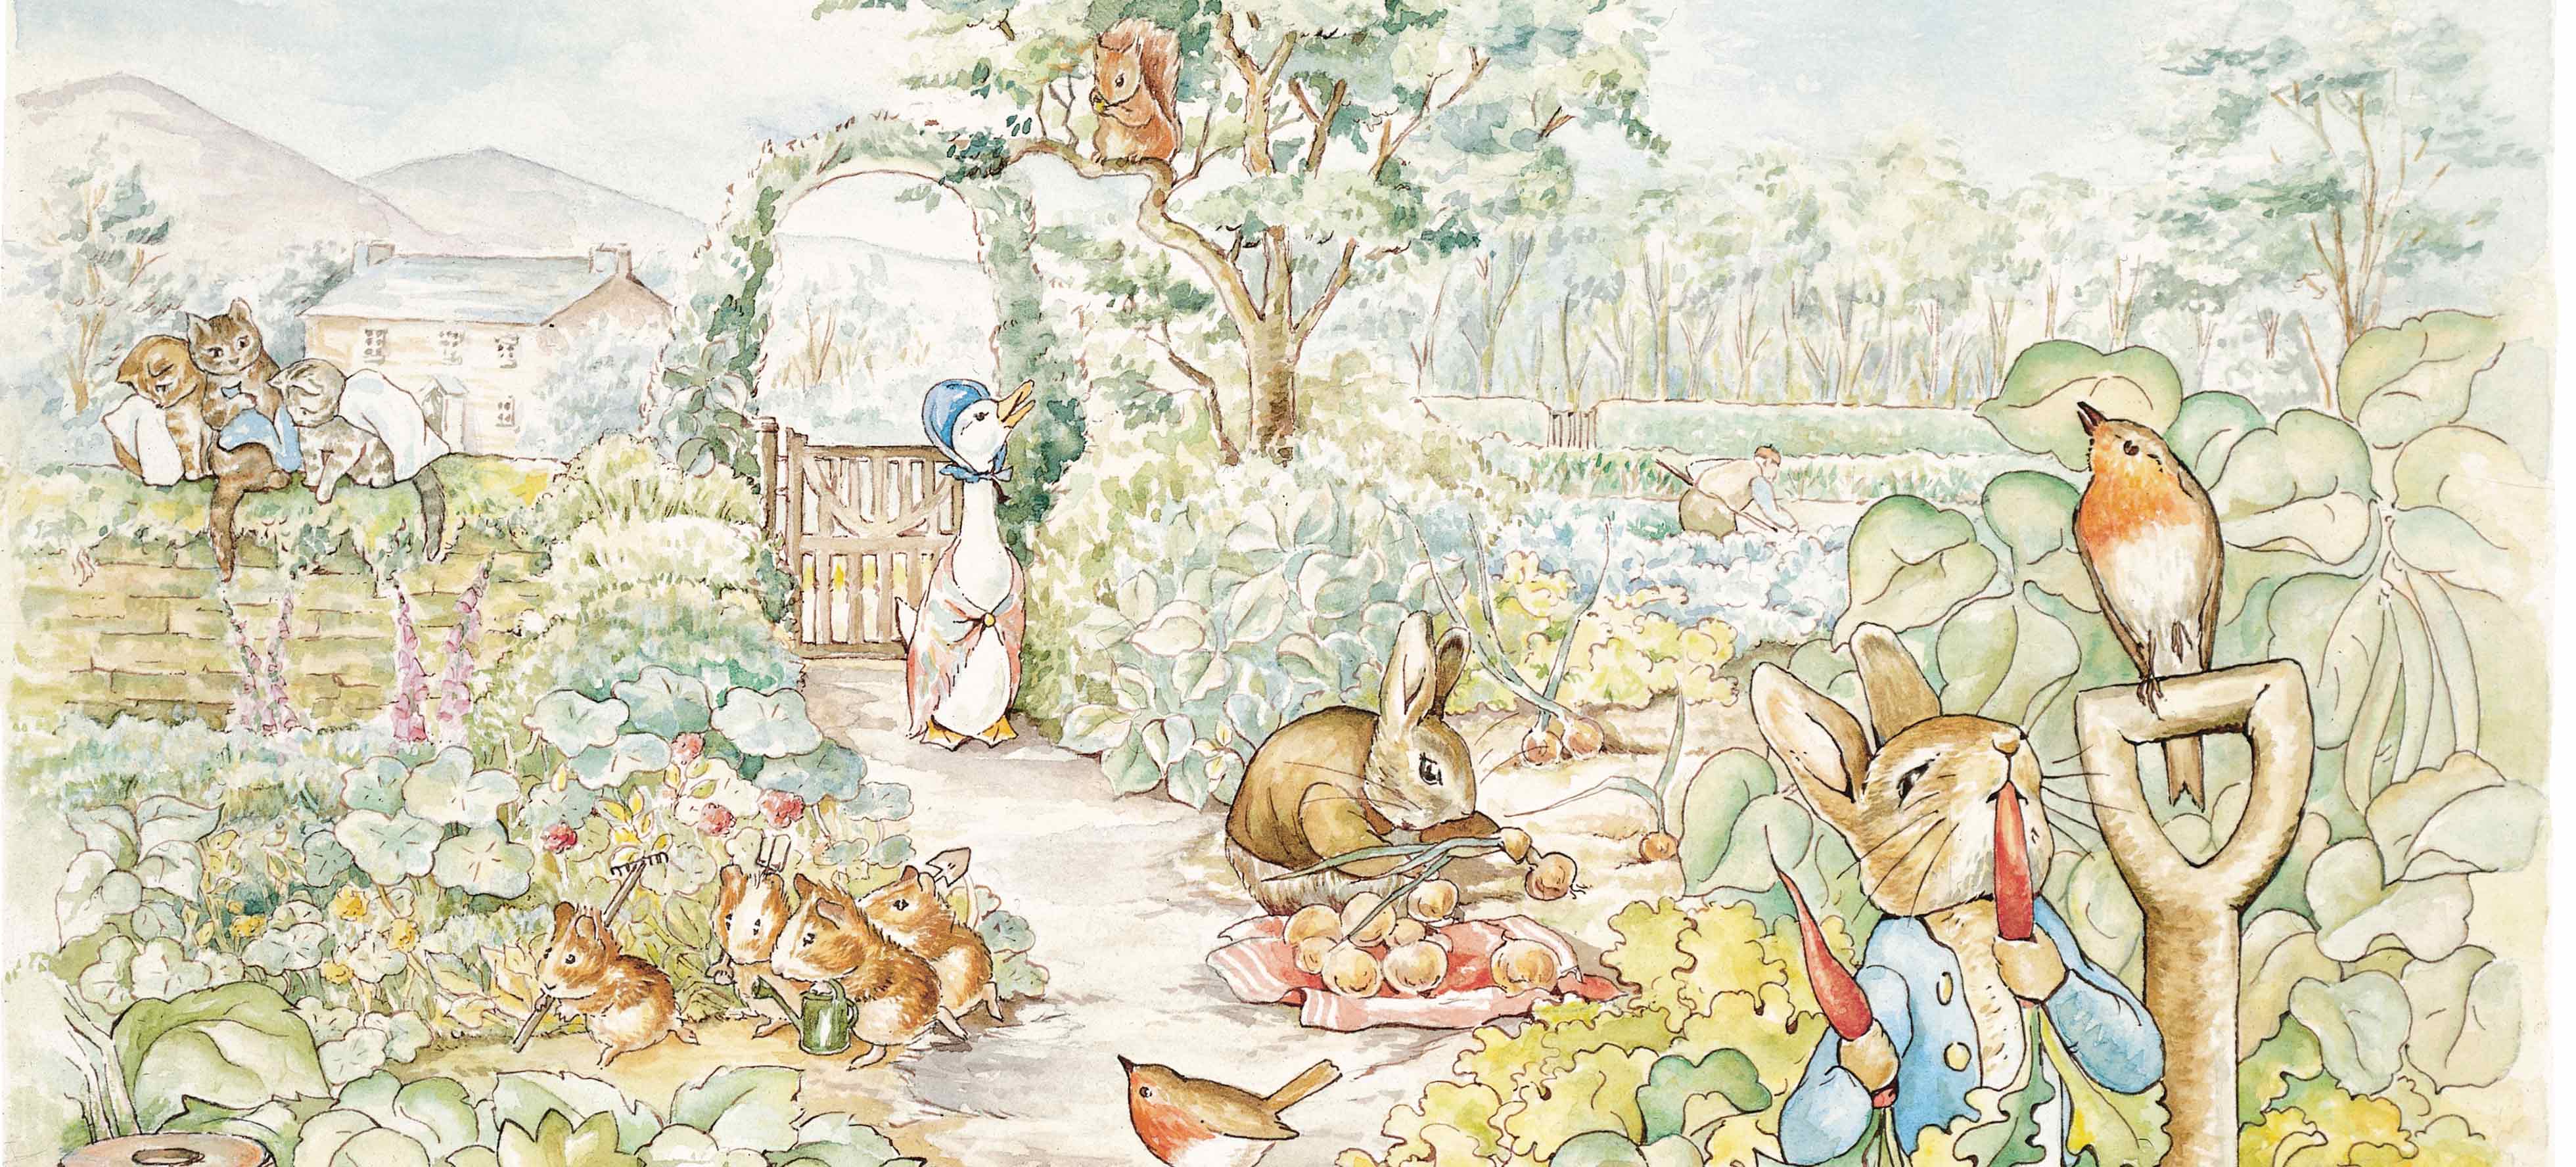 Header Image - Still the best selling app!! Peter Rabbit Free has new Version 5 and is now named Peter Rabbit and Friends!